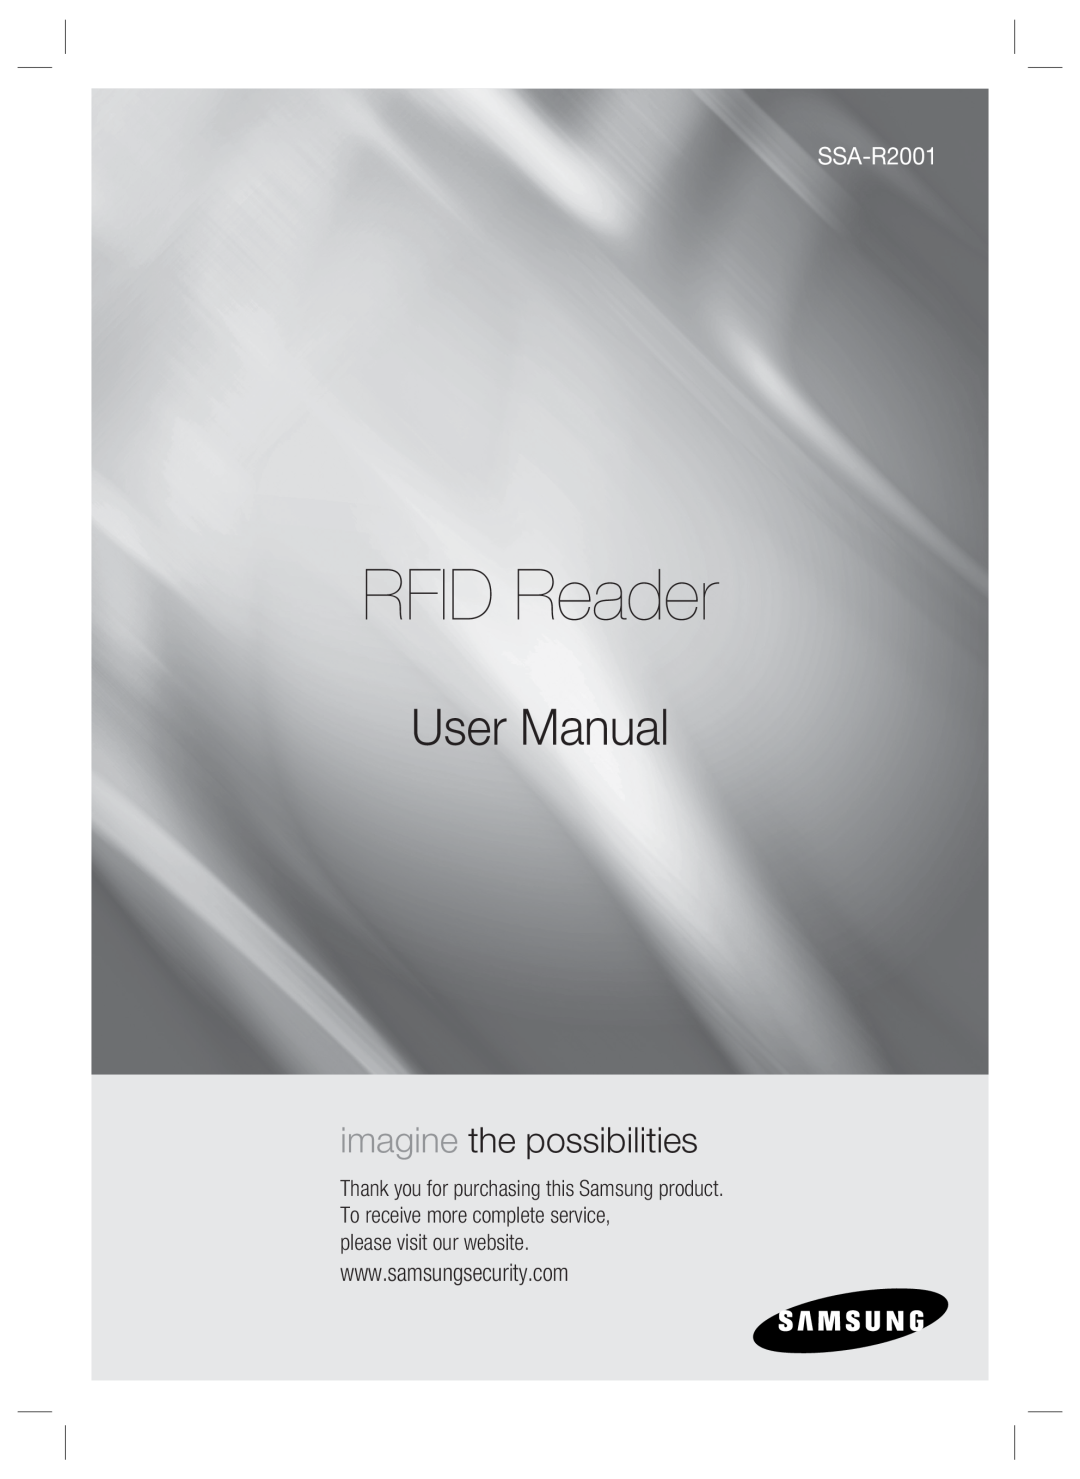 Samsung SSA-R2001 user manual please visit our website, RFID Reader, imagine the possibilities 